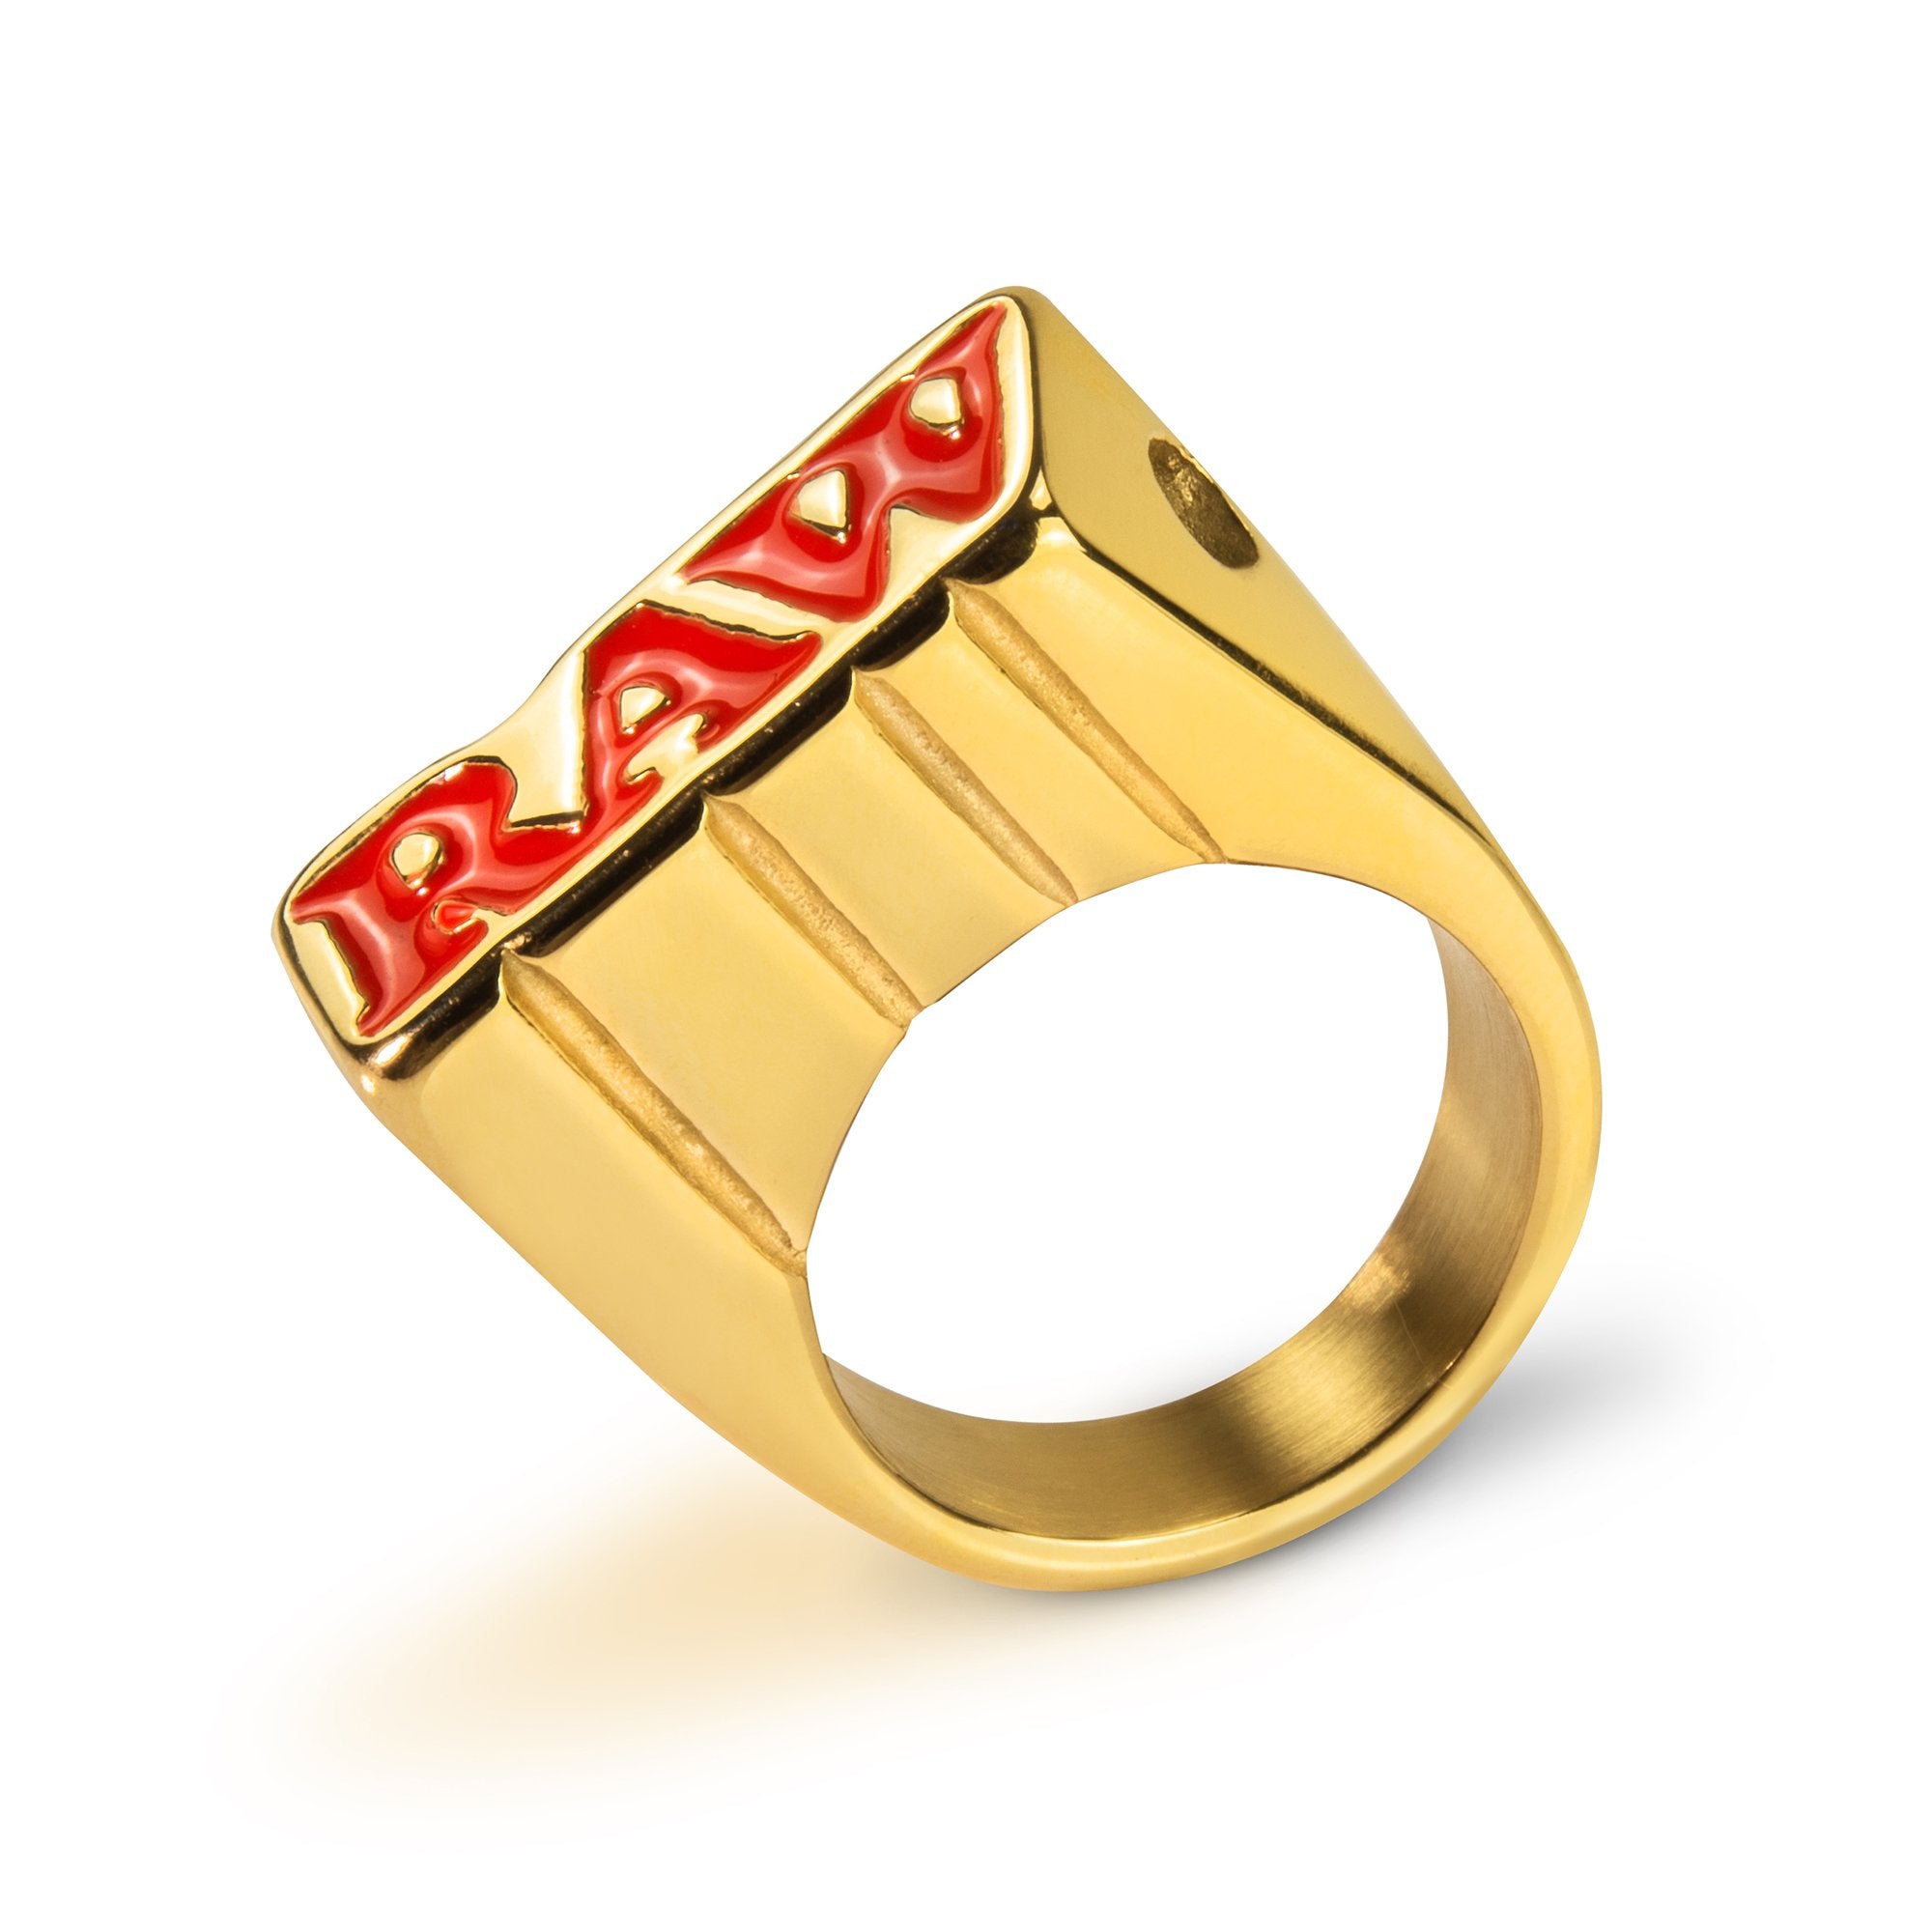 RAW Ring Gold Edition Lifestyle WAR00217-MUSA01 esd-official